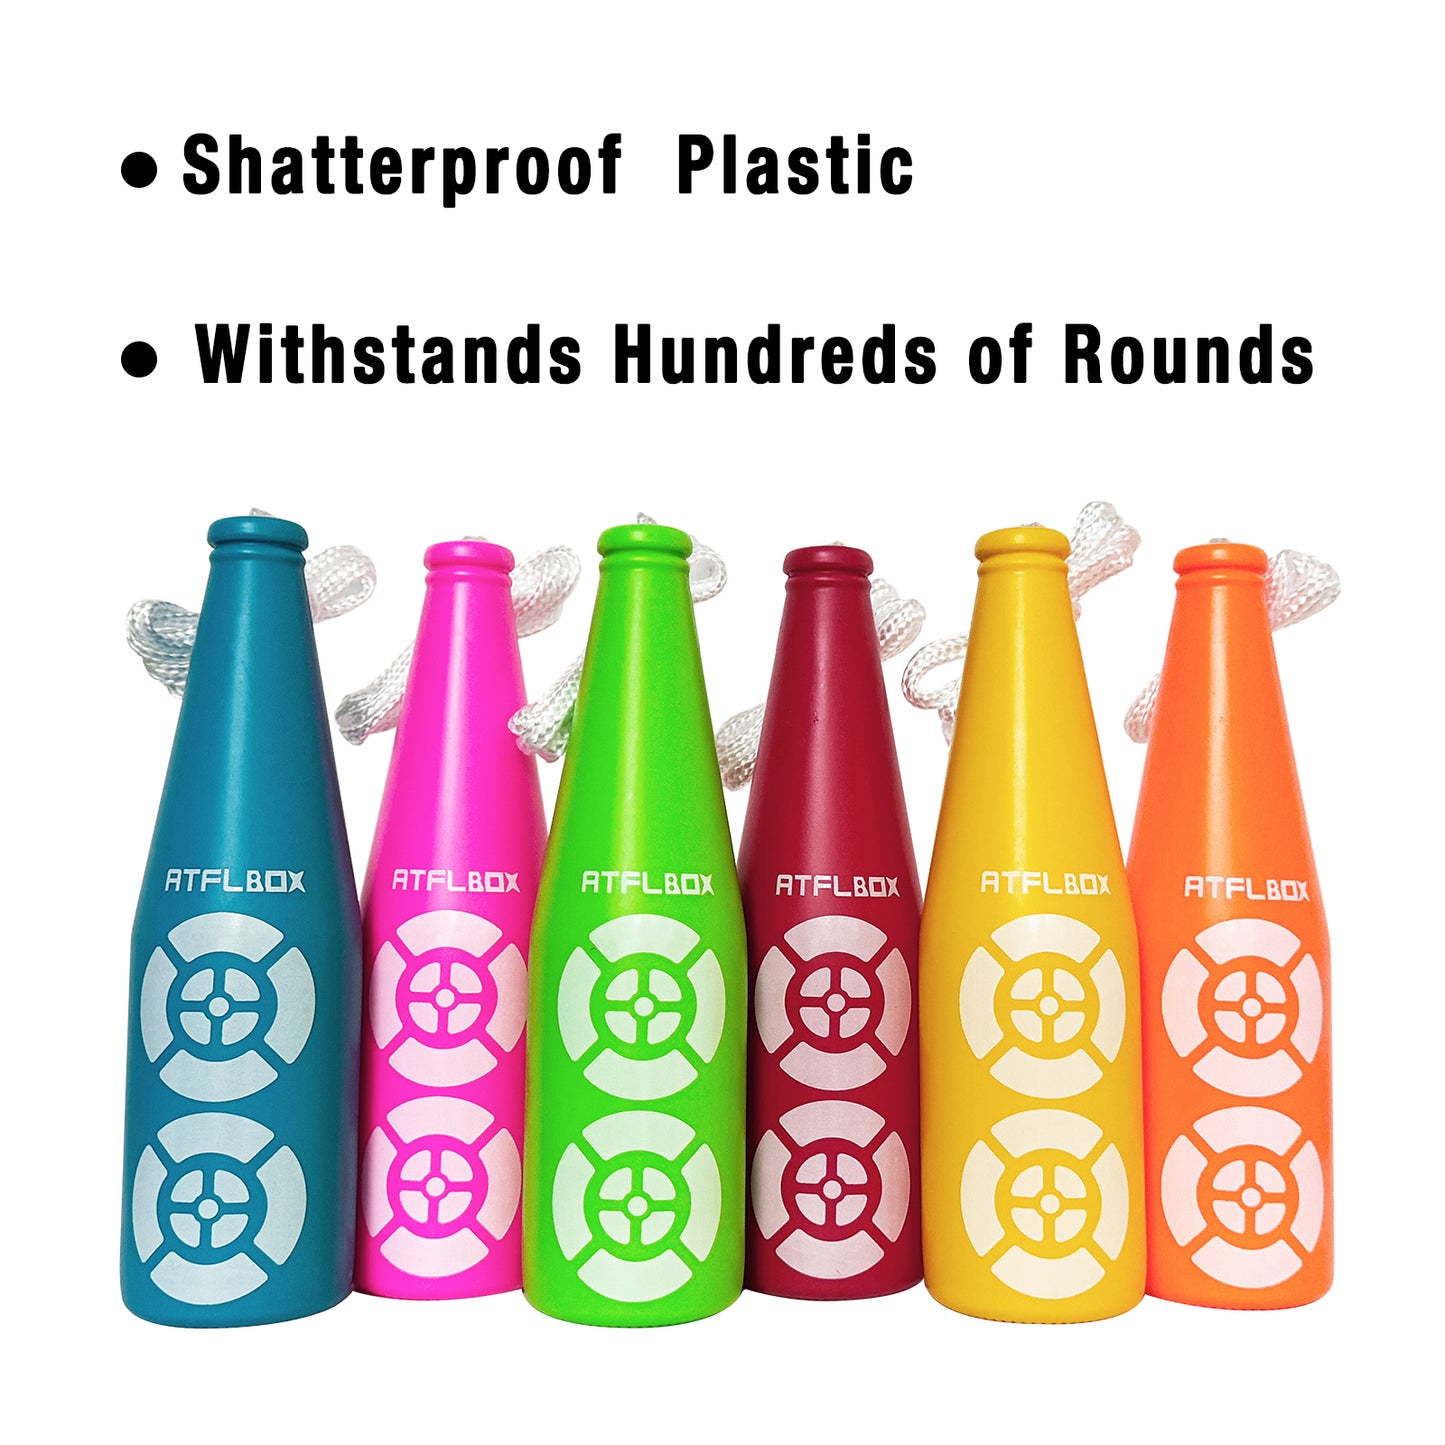 ATFLBOX Shatterproof Plastic Bottle Target for Shooting, 6 Bright Colors with Hanging Rope for Target Practice, Ideal for Indoor and Outdoor Training